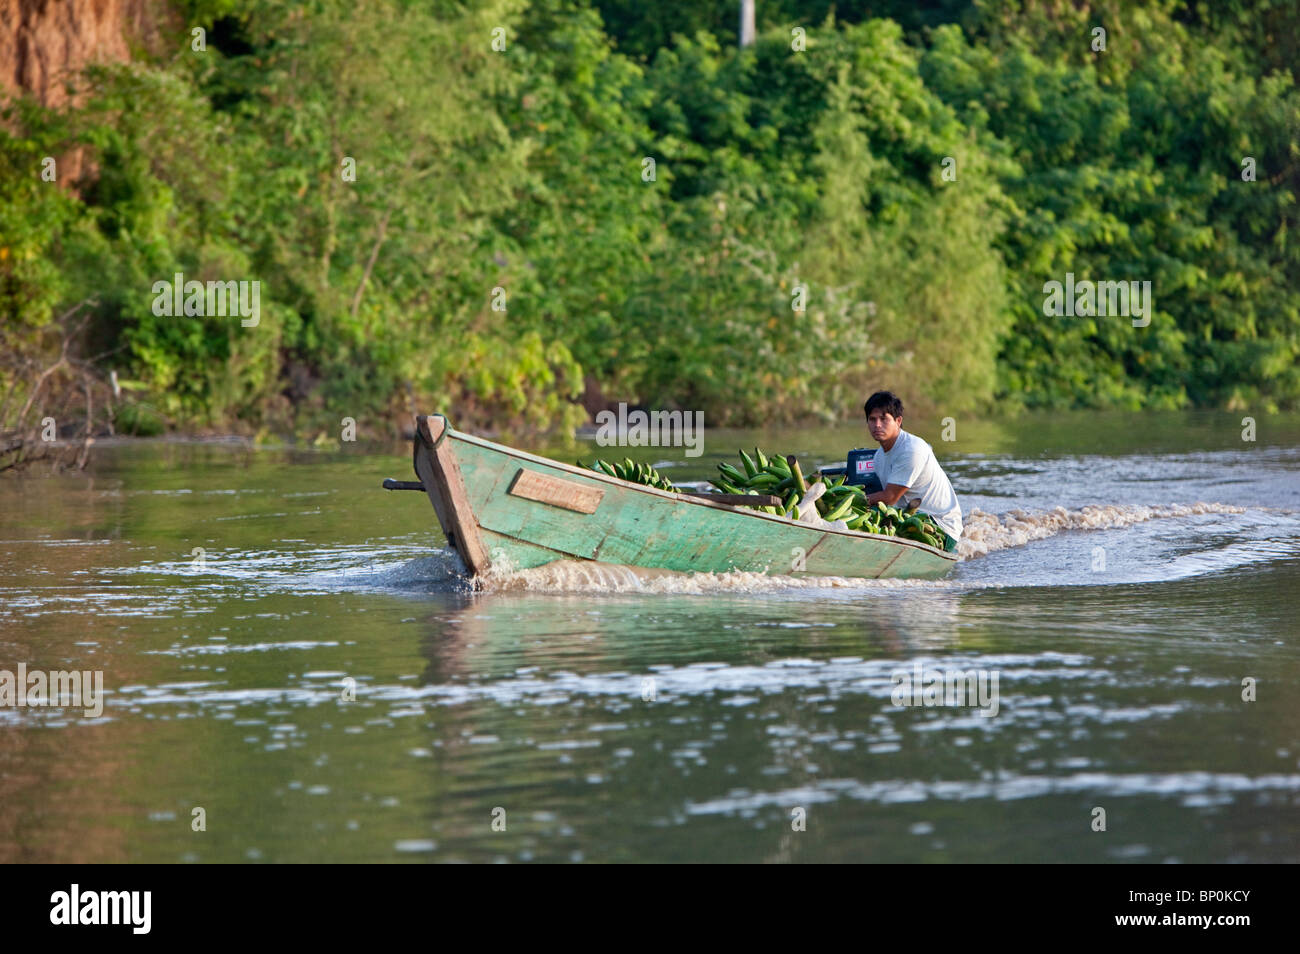 Peru. A man taking a load of bananas to market on the Madre de Dios River, a tributary of the Amazon. Stock Photo